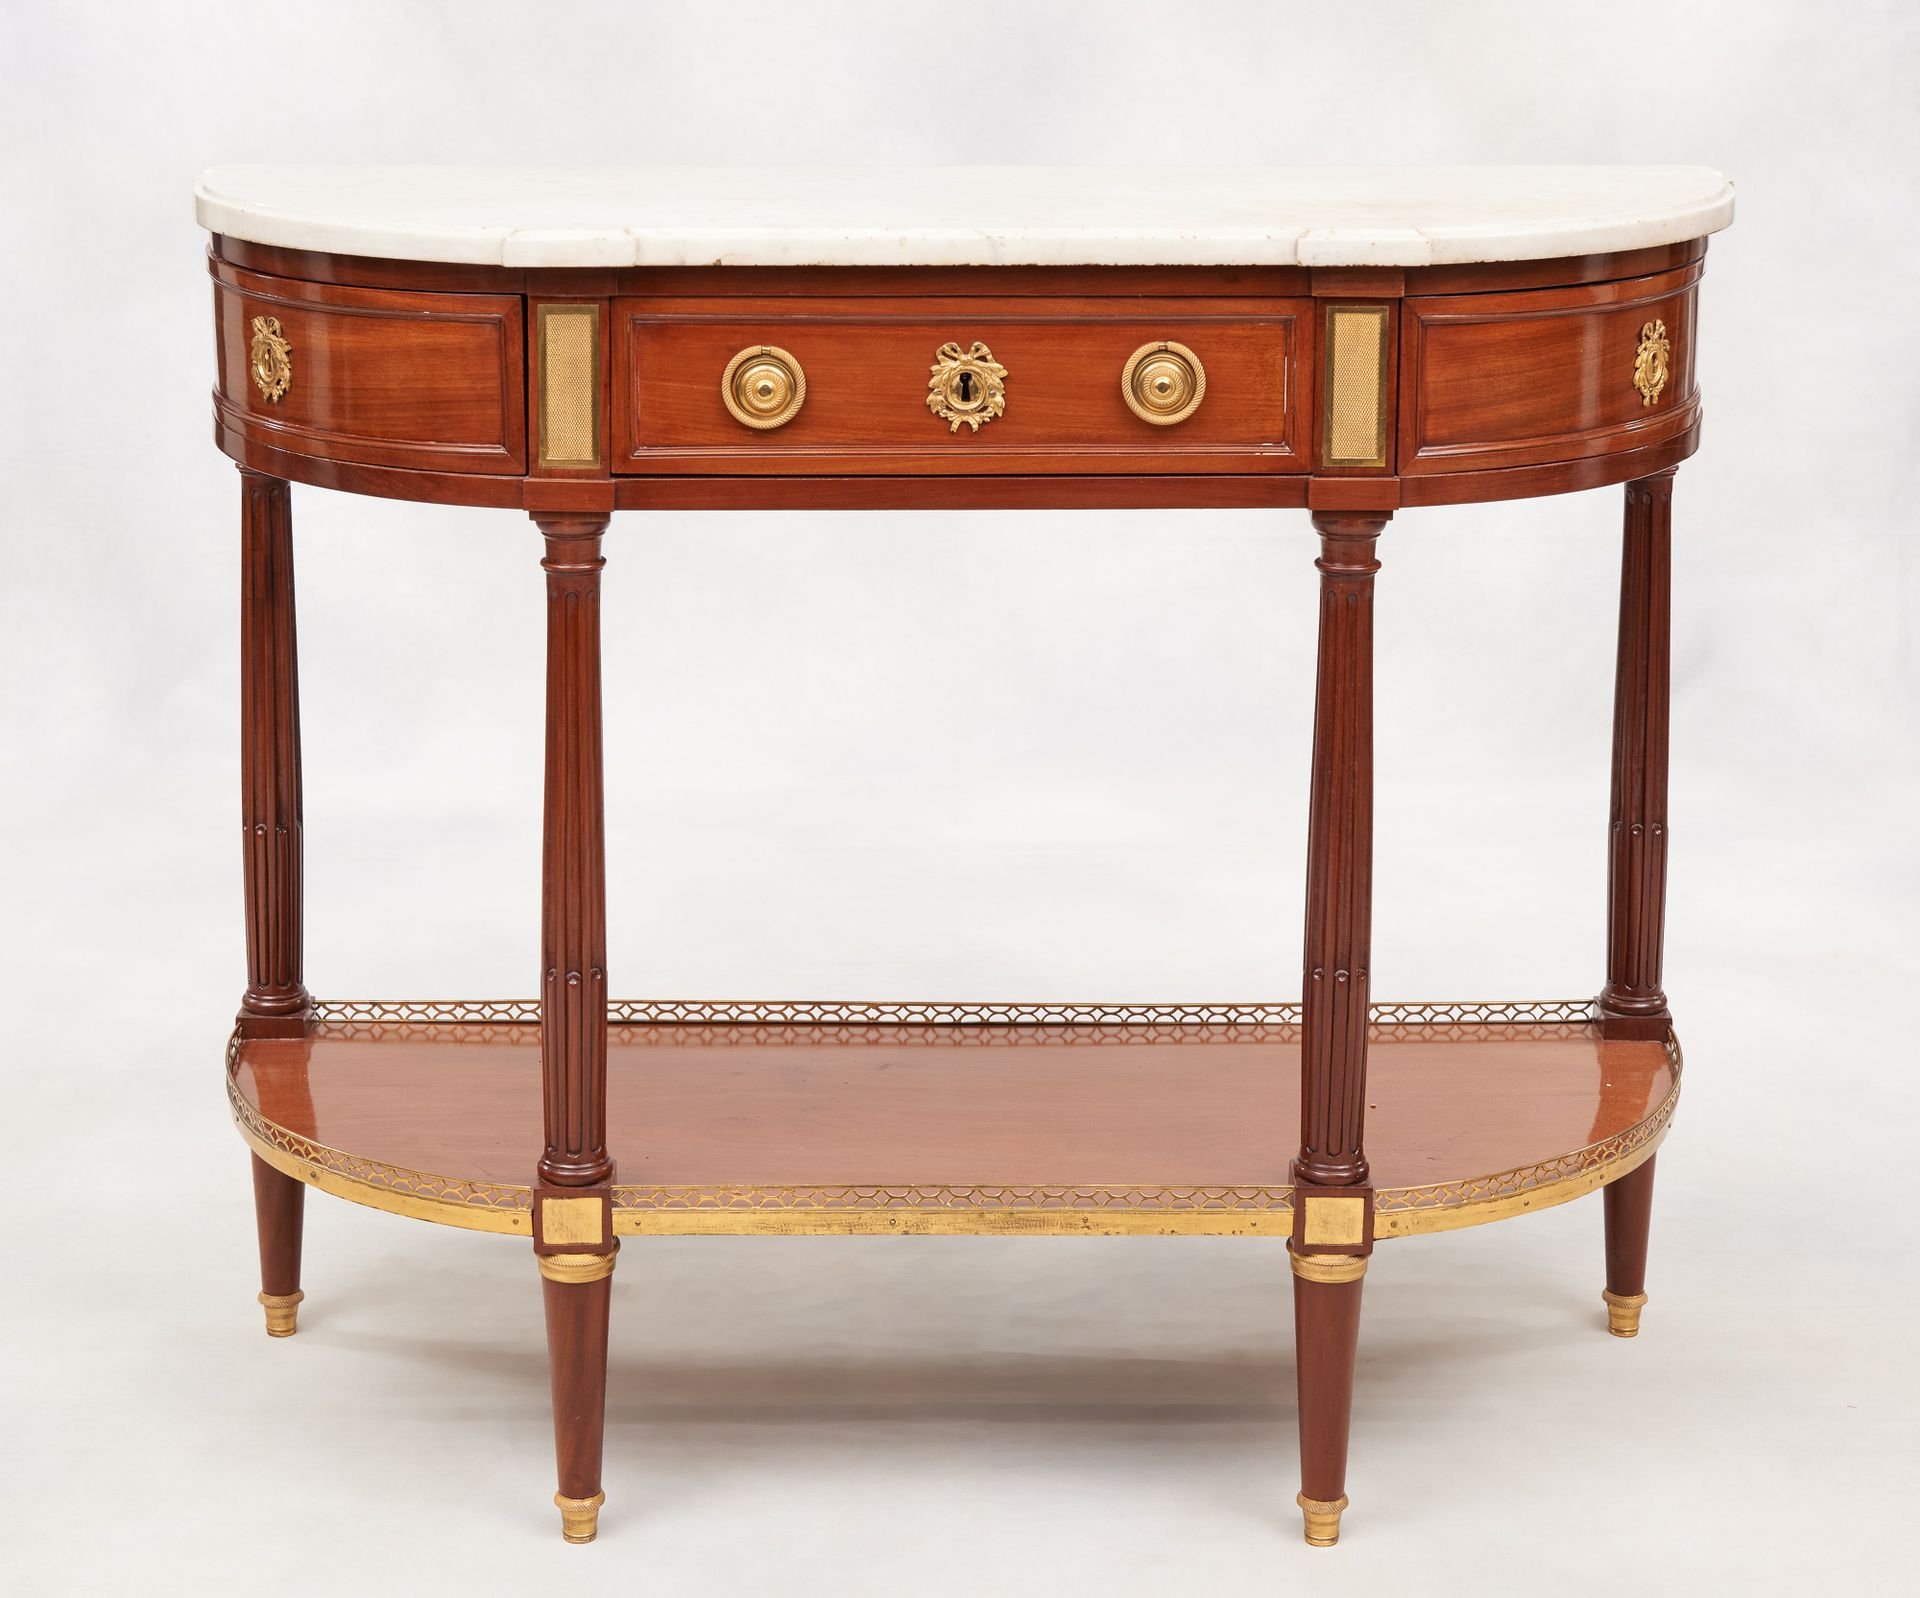 D'époque Louis XVI. Piece of furniture: Mahogany half-moon console with a drawer&hellip;